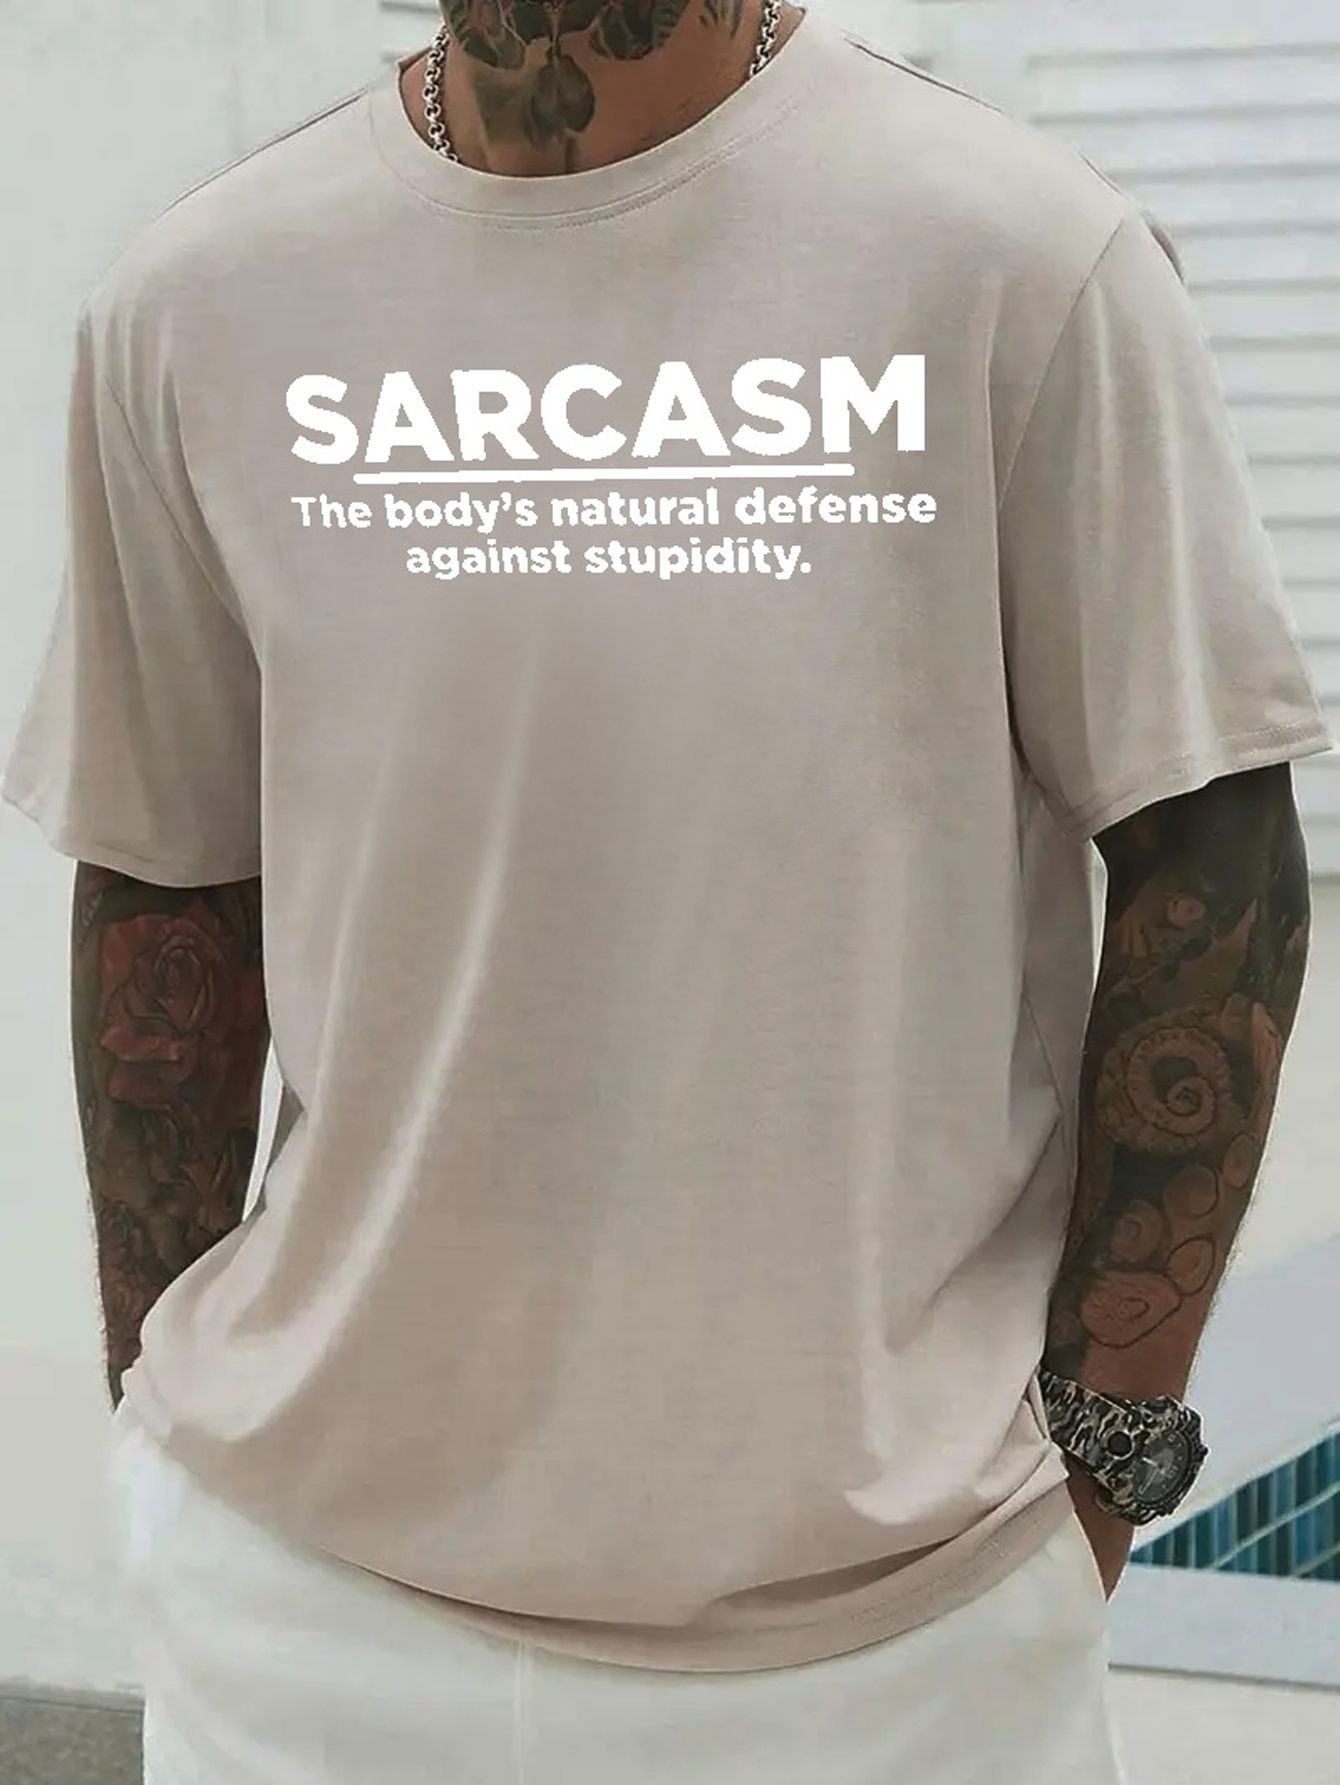 Sarcasm Primary Elements Of Humor T-shirt Casual Summer Crewneck Periodic  Table Print Tees Tops Men